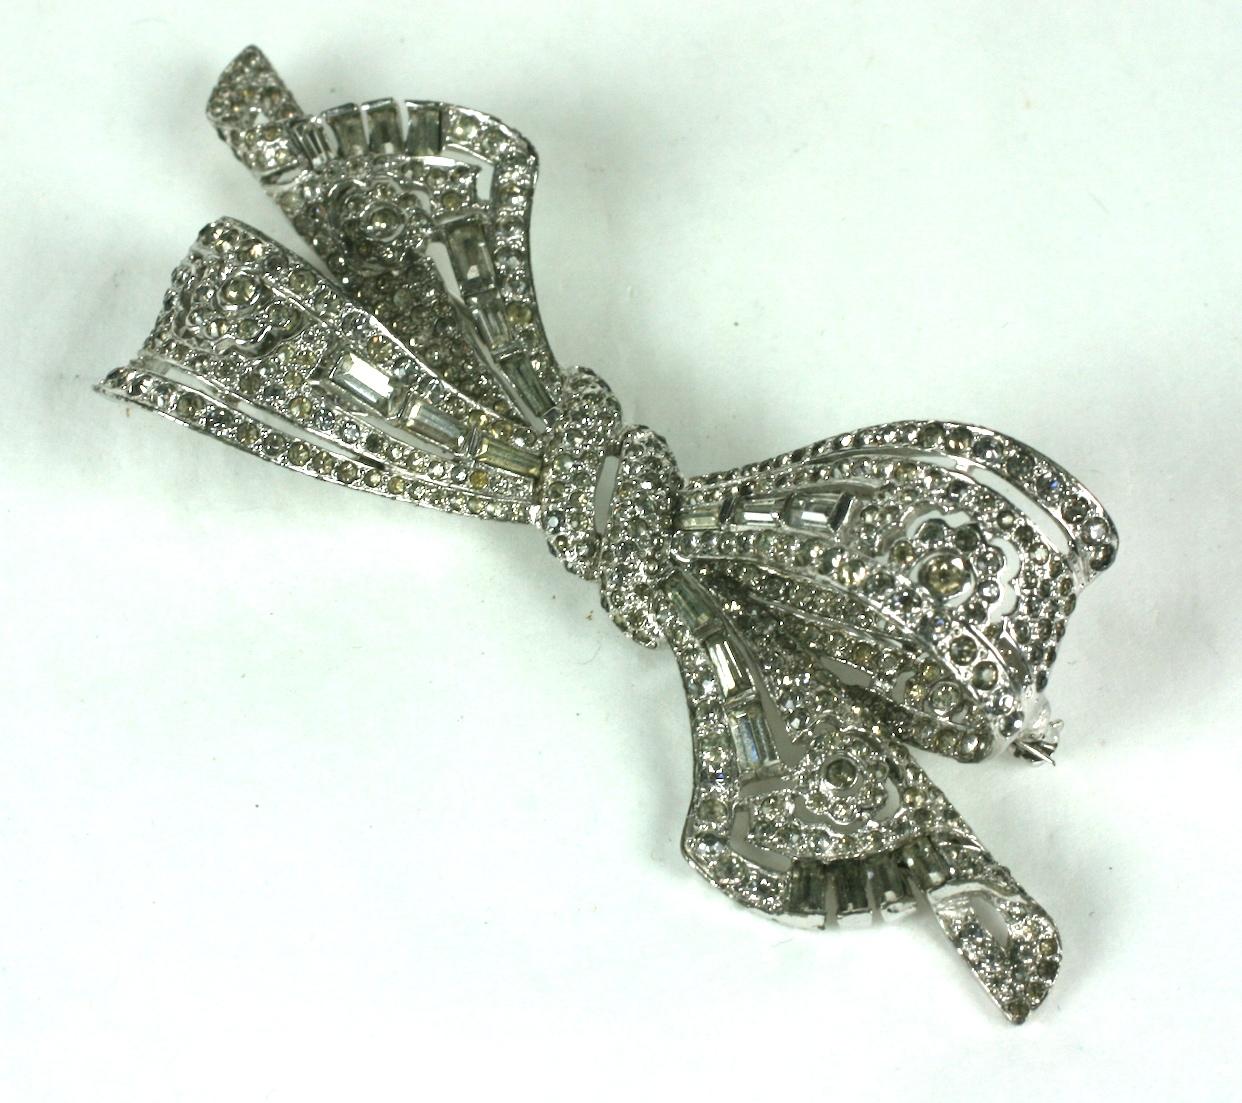 Marcel Boucher crystal pave and baguettes floral bow brooch.  Rhodium plated base metal, crystal rhinestones, pierce work set with rectangular and tapered baguettes.
Signed MB (phrygian cap) 
Excellent Condition Length 3